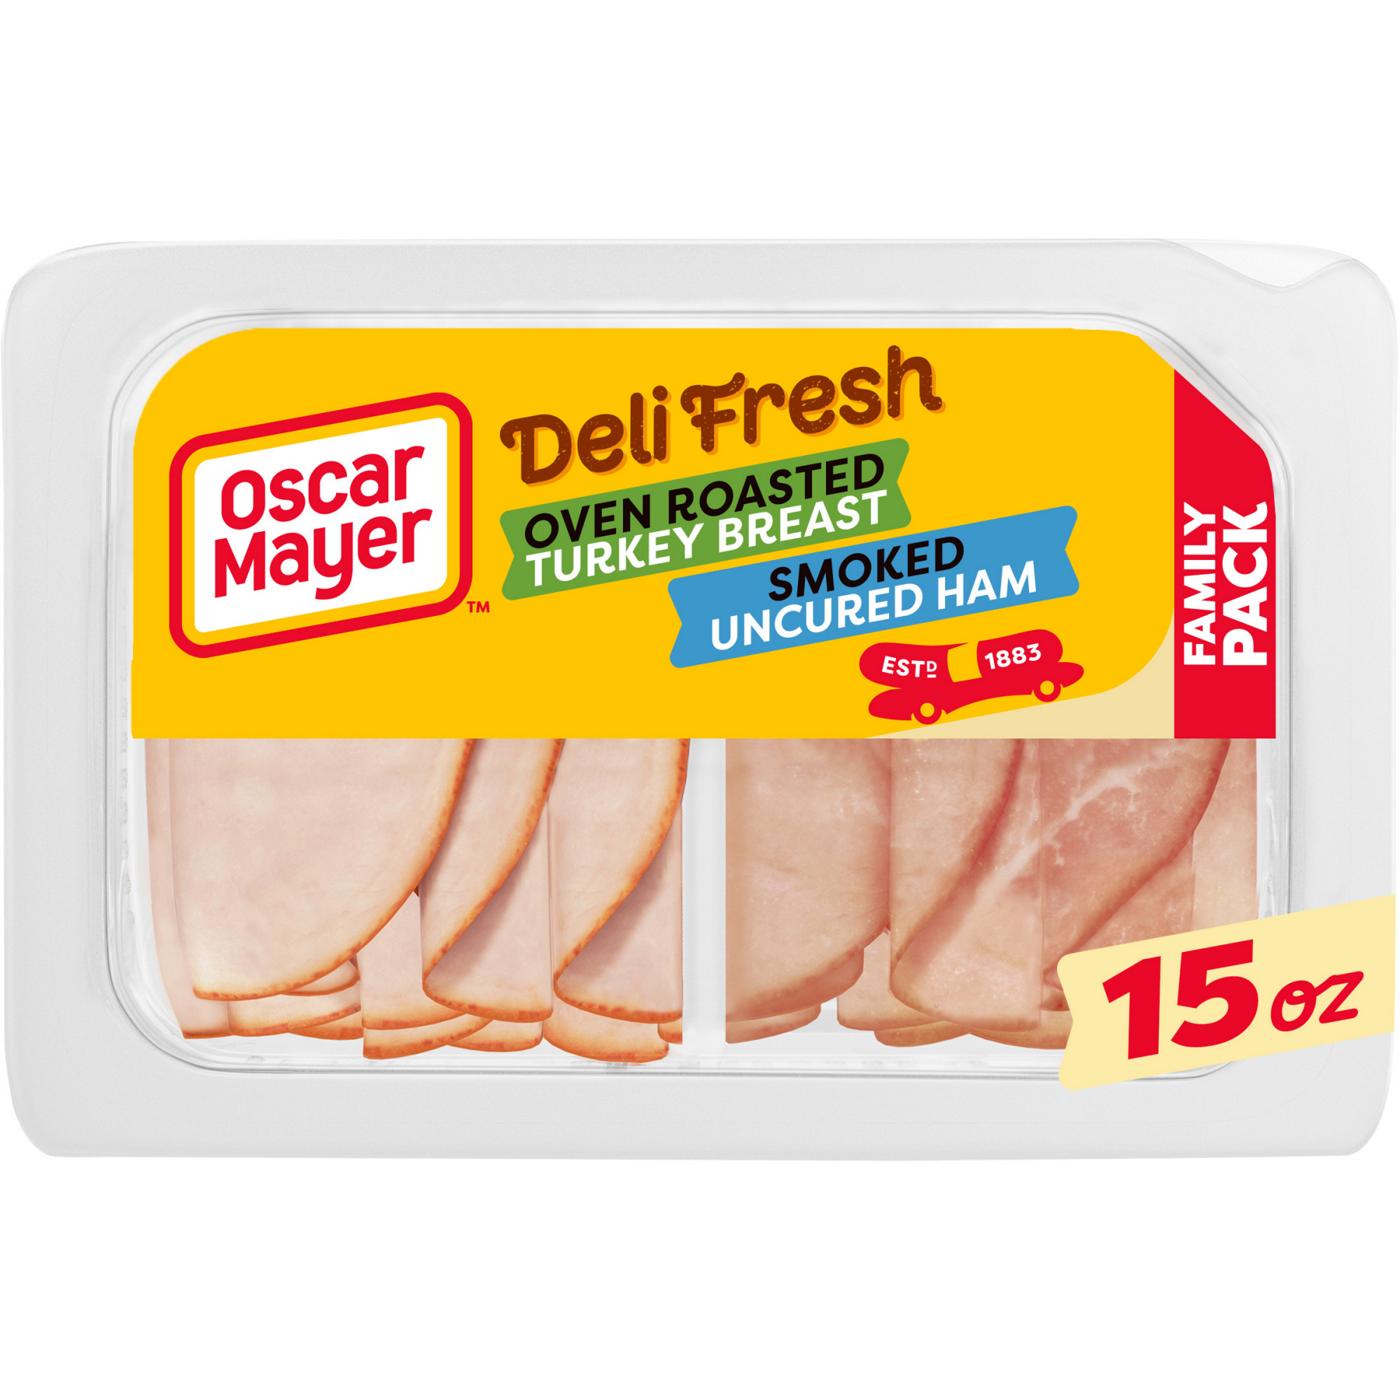 Oscar Mayer Deli Fresh Oven Roasted Turkey Breast & Smoked Uncured Sliced Ham Lunch Meats - Family Pack; image 1 of 6